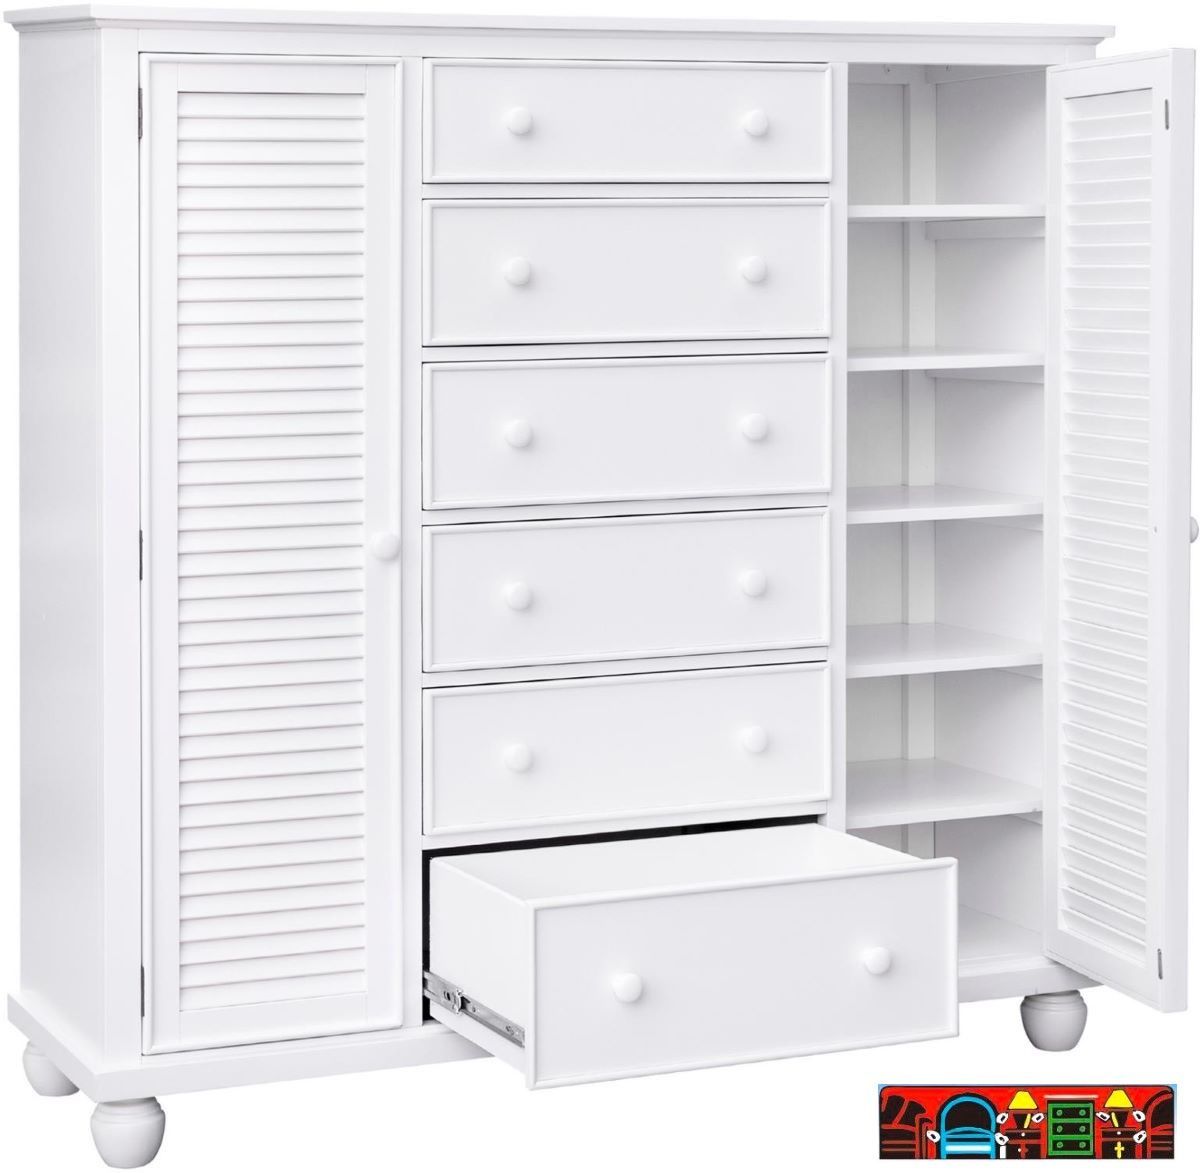 Nantucket Chifforobe in white, crafted from solid wood, featuring six drawers, two doors, and bun feet. Door open.